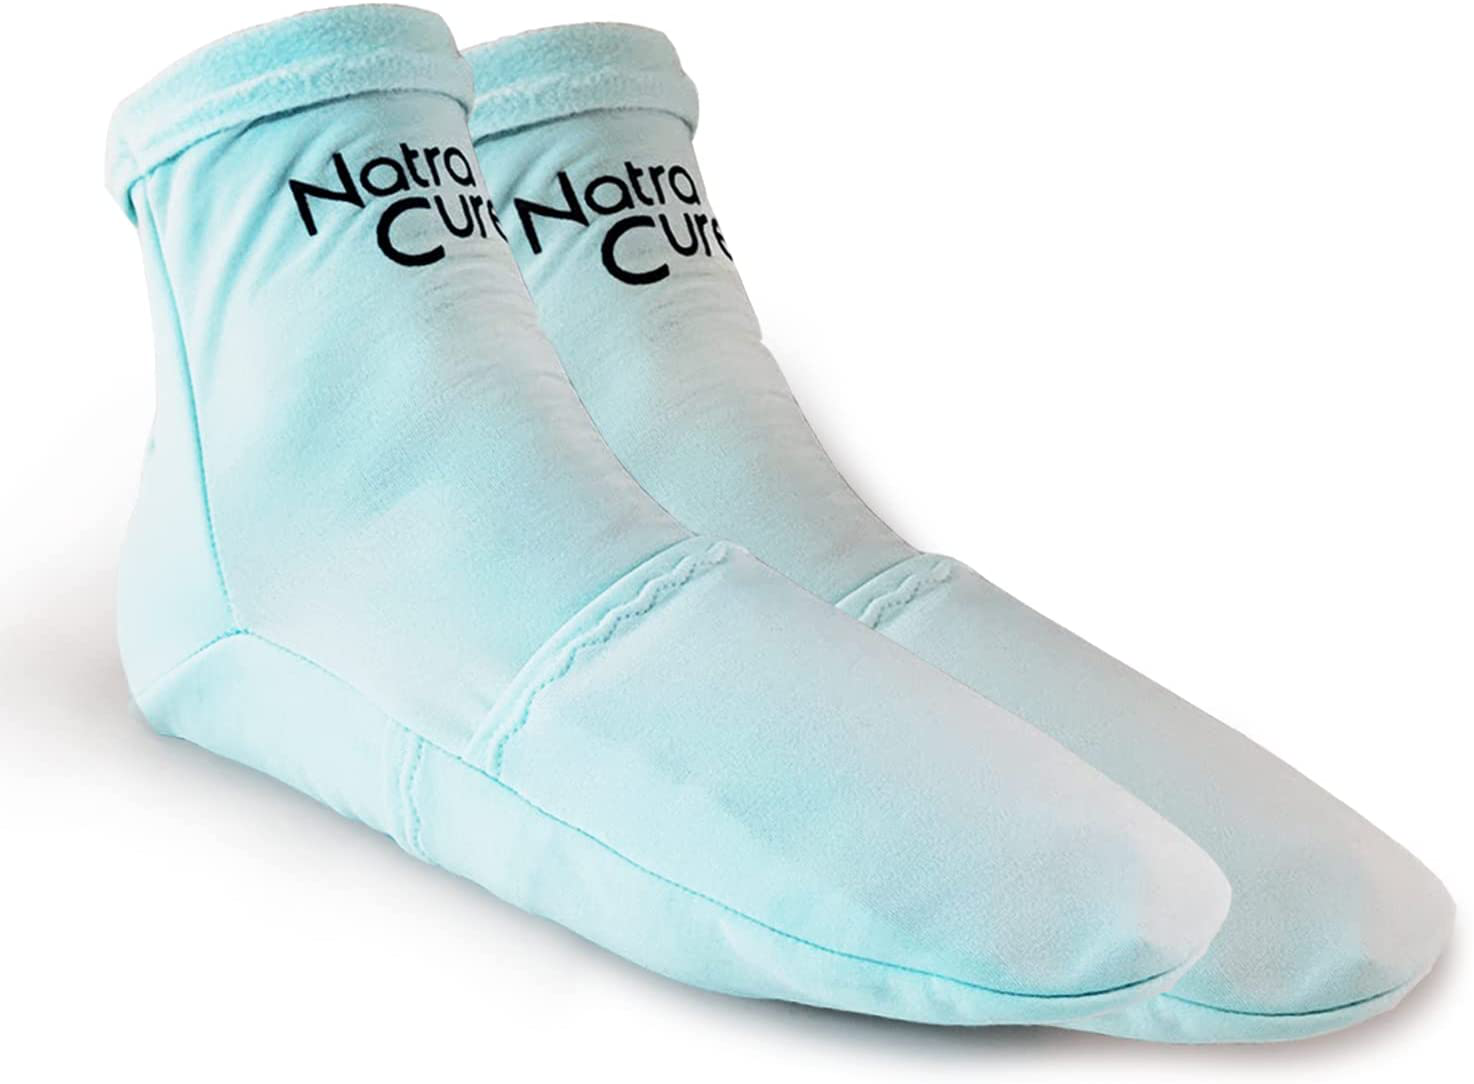 Natracure Cold Therapy Socks - Reusable Gel Ice Frozen Slippers for Feet, Heels, Swelling, Edema, Arch, Chemotherapy, Arthritis, Neuropathy, Plantar Fasciitis, Post Partum Foot, Size: Small/Medium